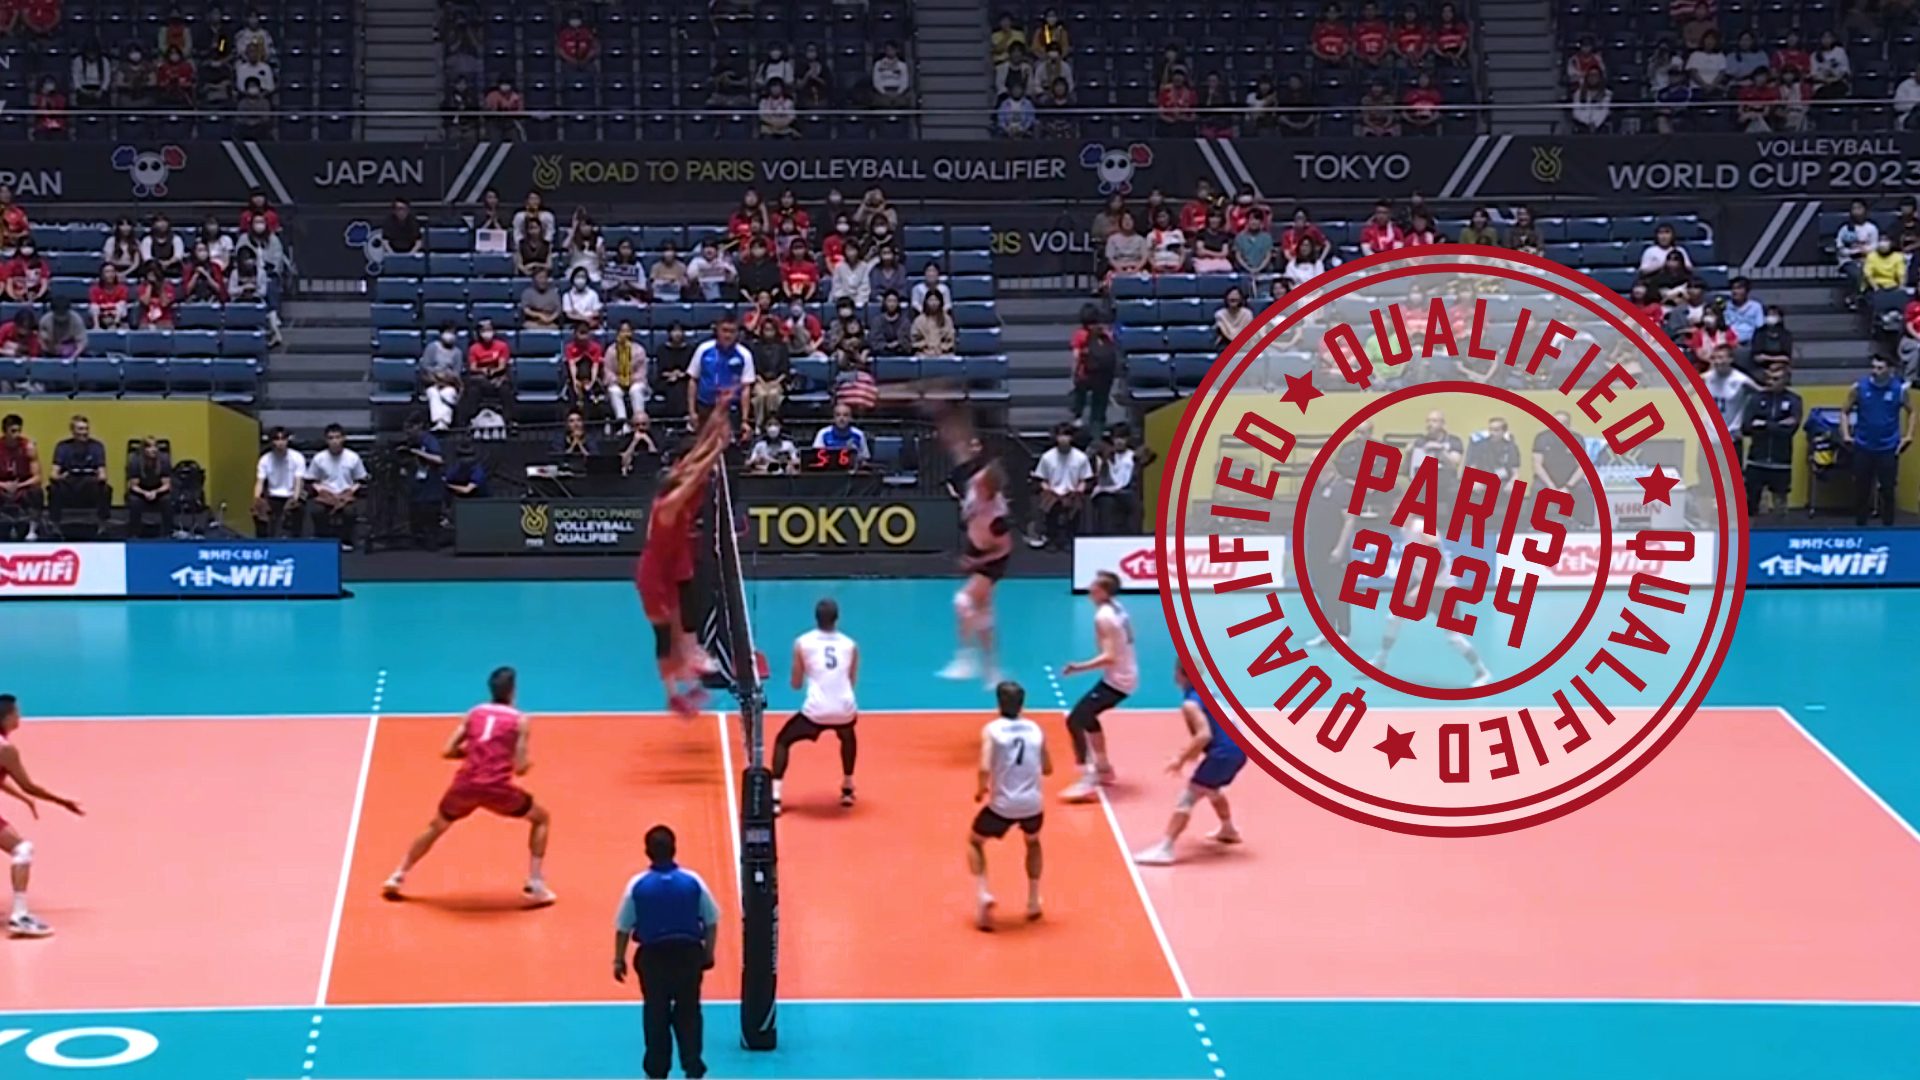 volleyball streaming video